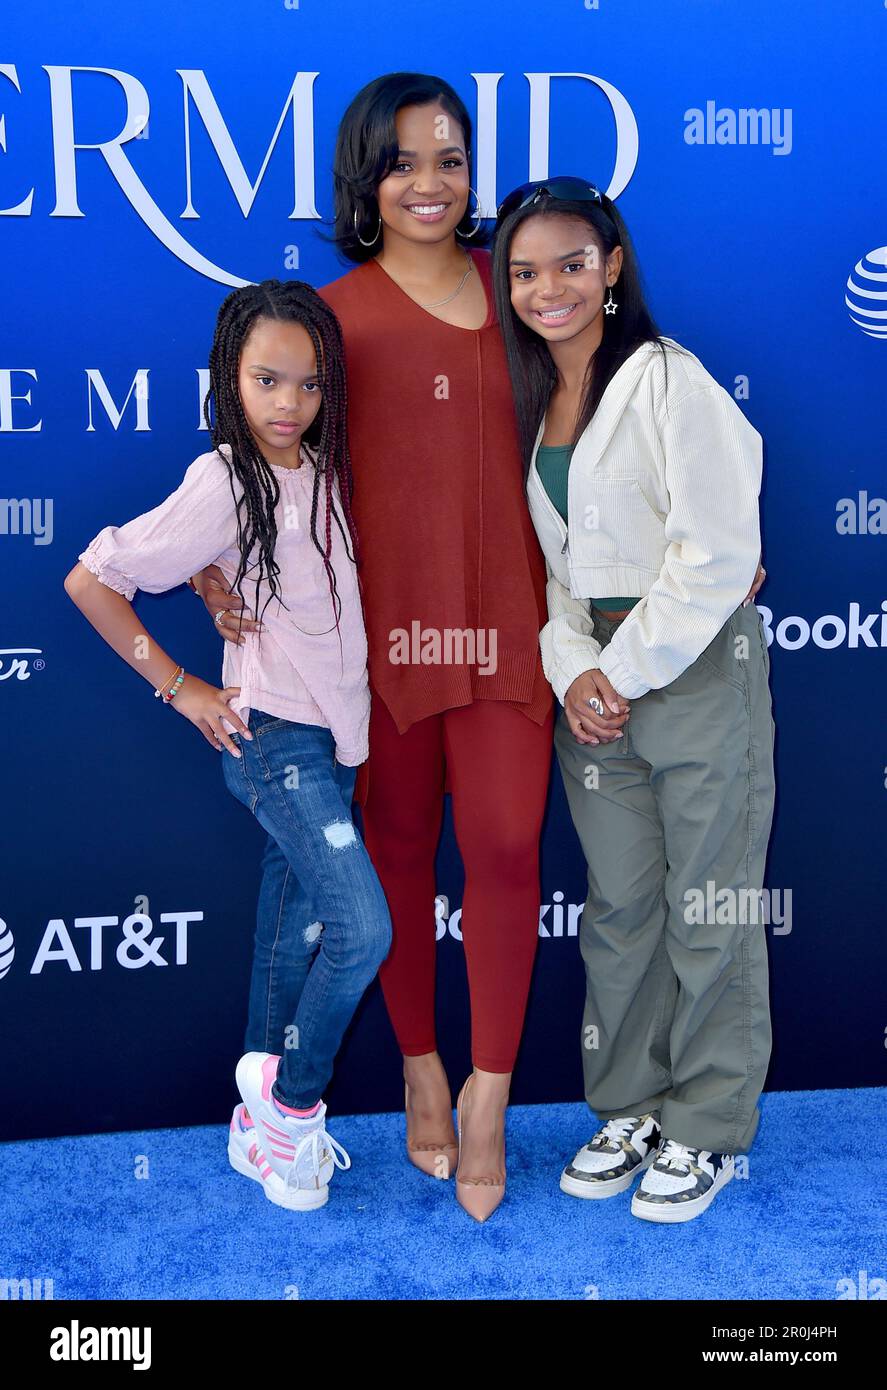 Kyla Pratt, center, and daughters Liyah Kilpatrick, right, and Lyric Kai Kilpatrick arrive at the world premiere of "The Little Mermaid" on Monday, May 8, 2023, at the Dolby Theatre in Los Angeles. (Photo by Jordan Strauss/Invision/AP) Stockfoto